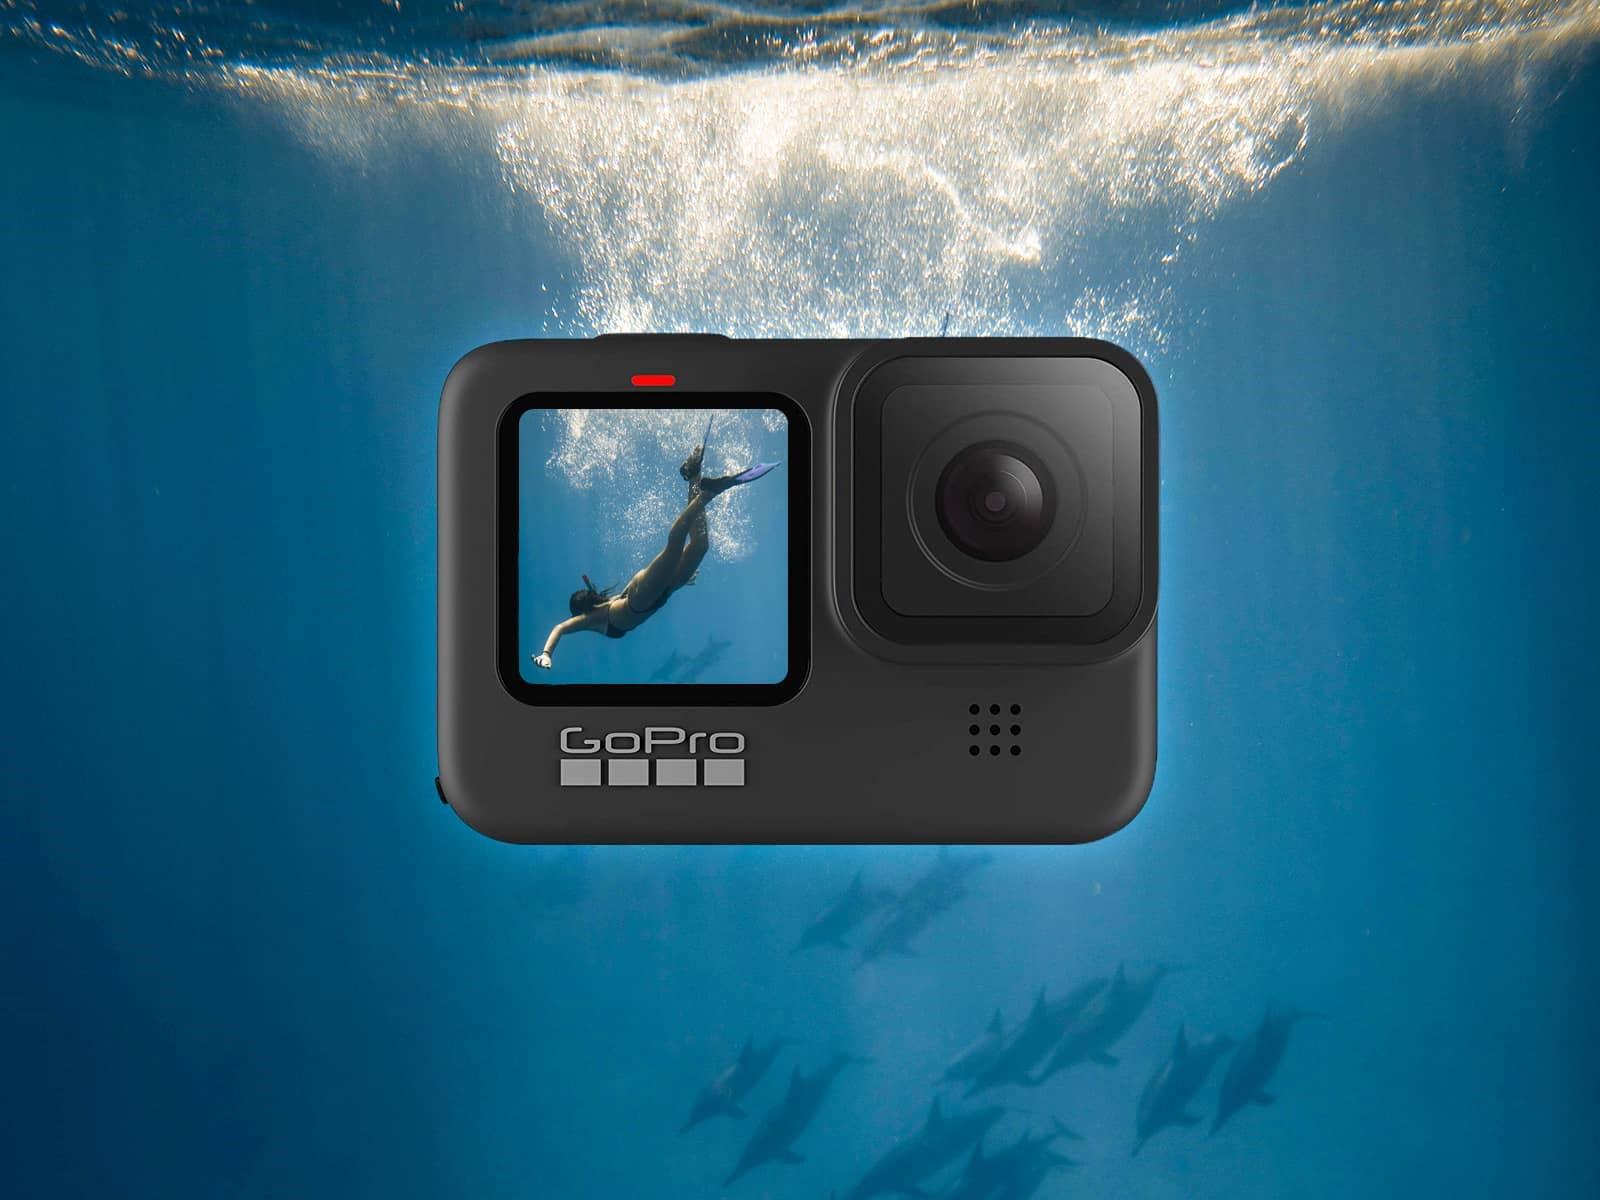 There's a lot to like about the GoPro hero 9 black, but is it the best gopro for snorkeling?